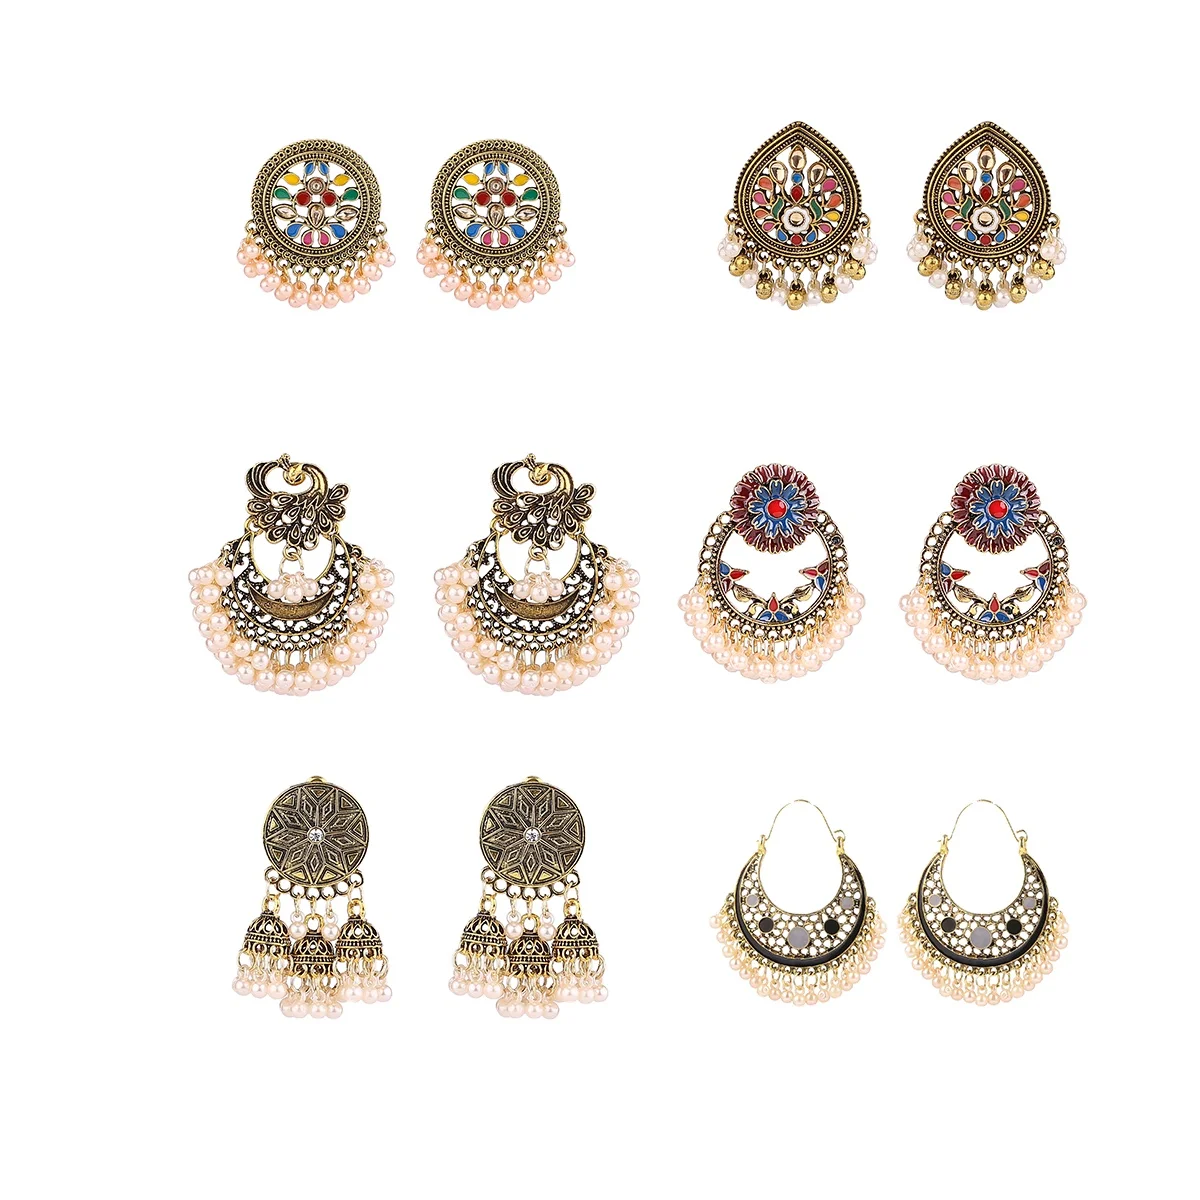 

New Arrival Retro Court Style Sector Indian Jewelry Earrings Traditional Small Pearl Drop Jhumka Womans Earring Set, Gold/silver/black/blue/mix/green/pink